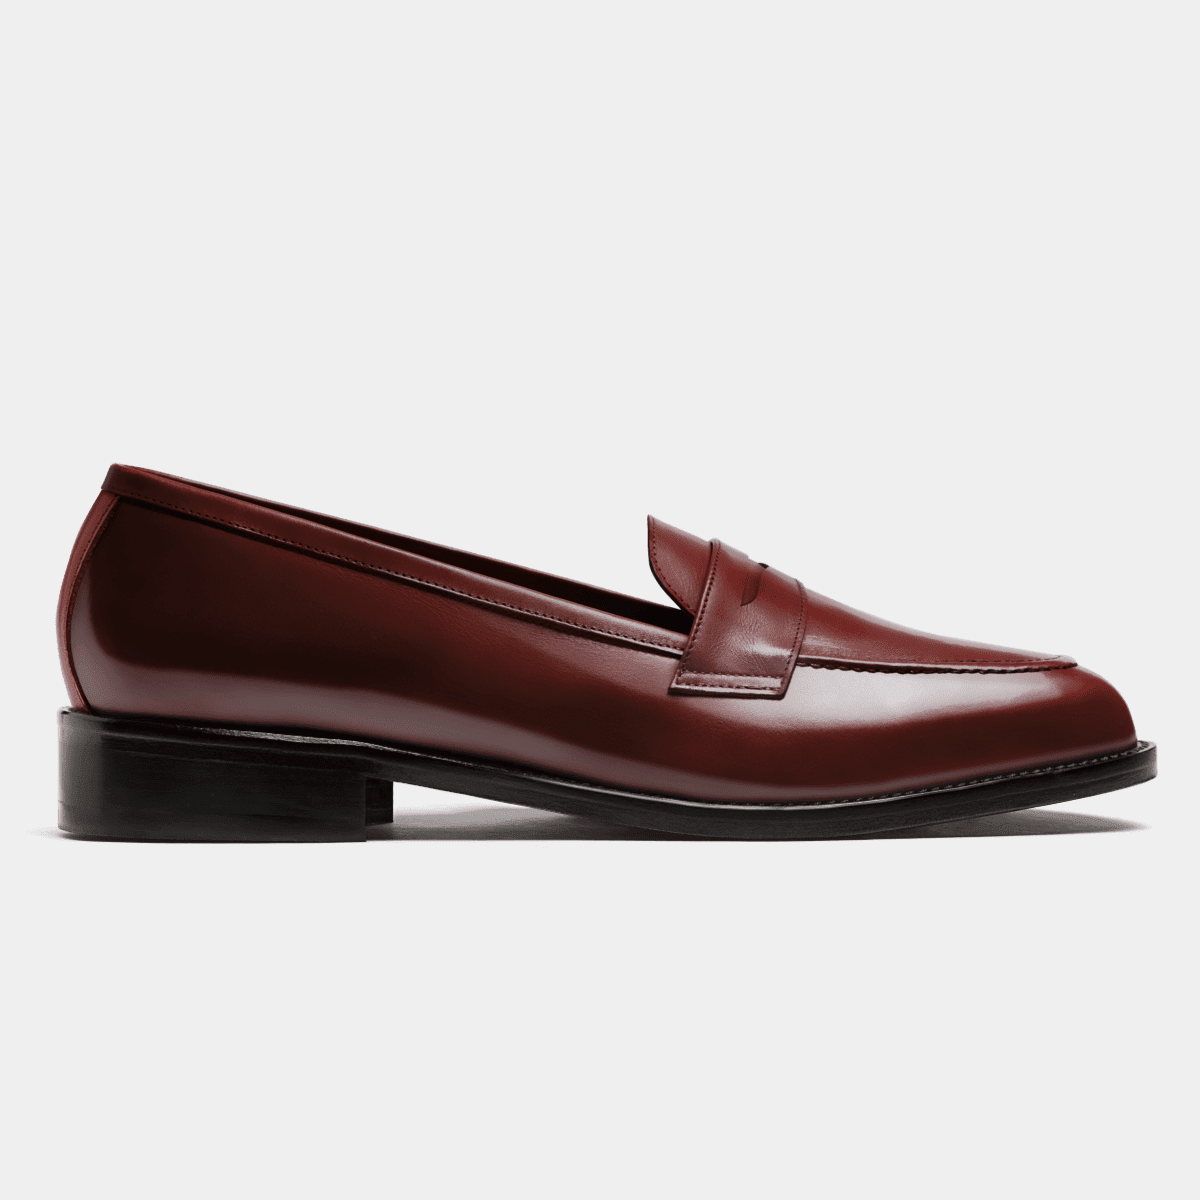 Penny Loafers - oxblood & brown flora leather & leather